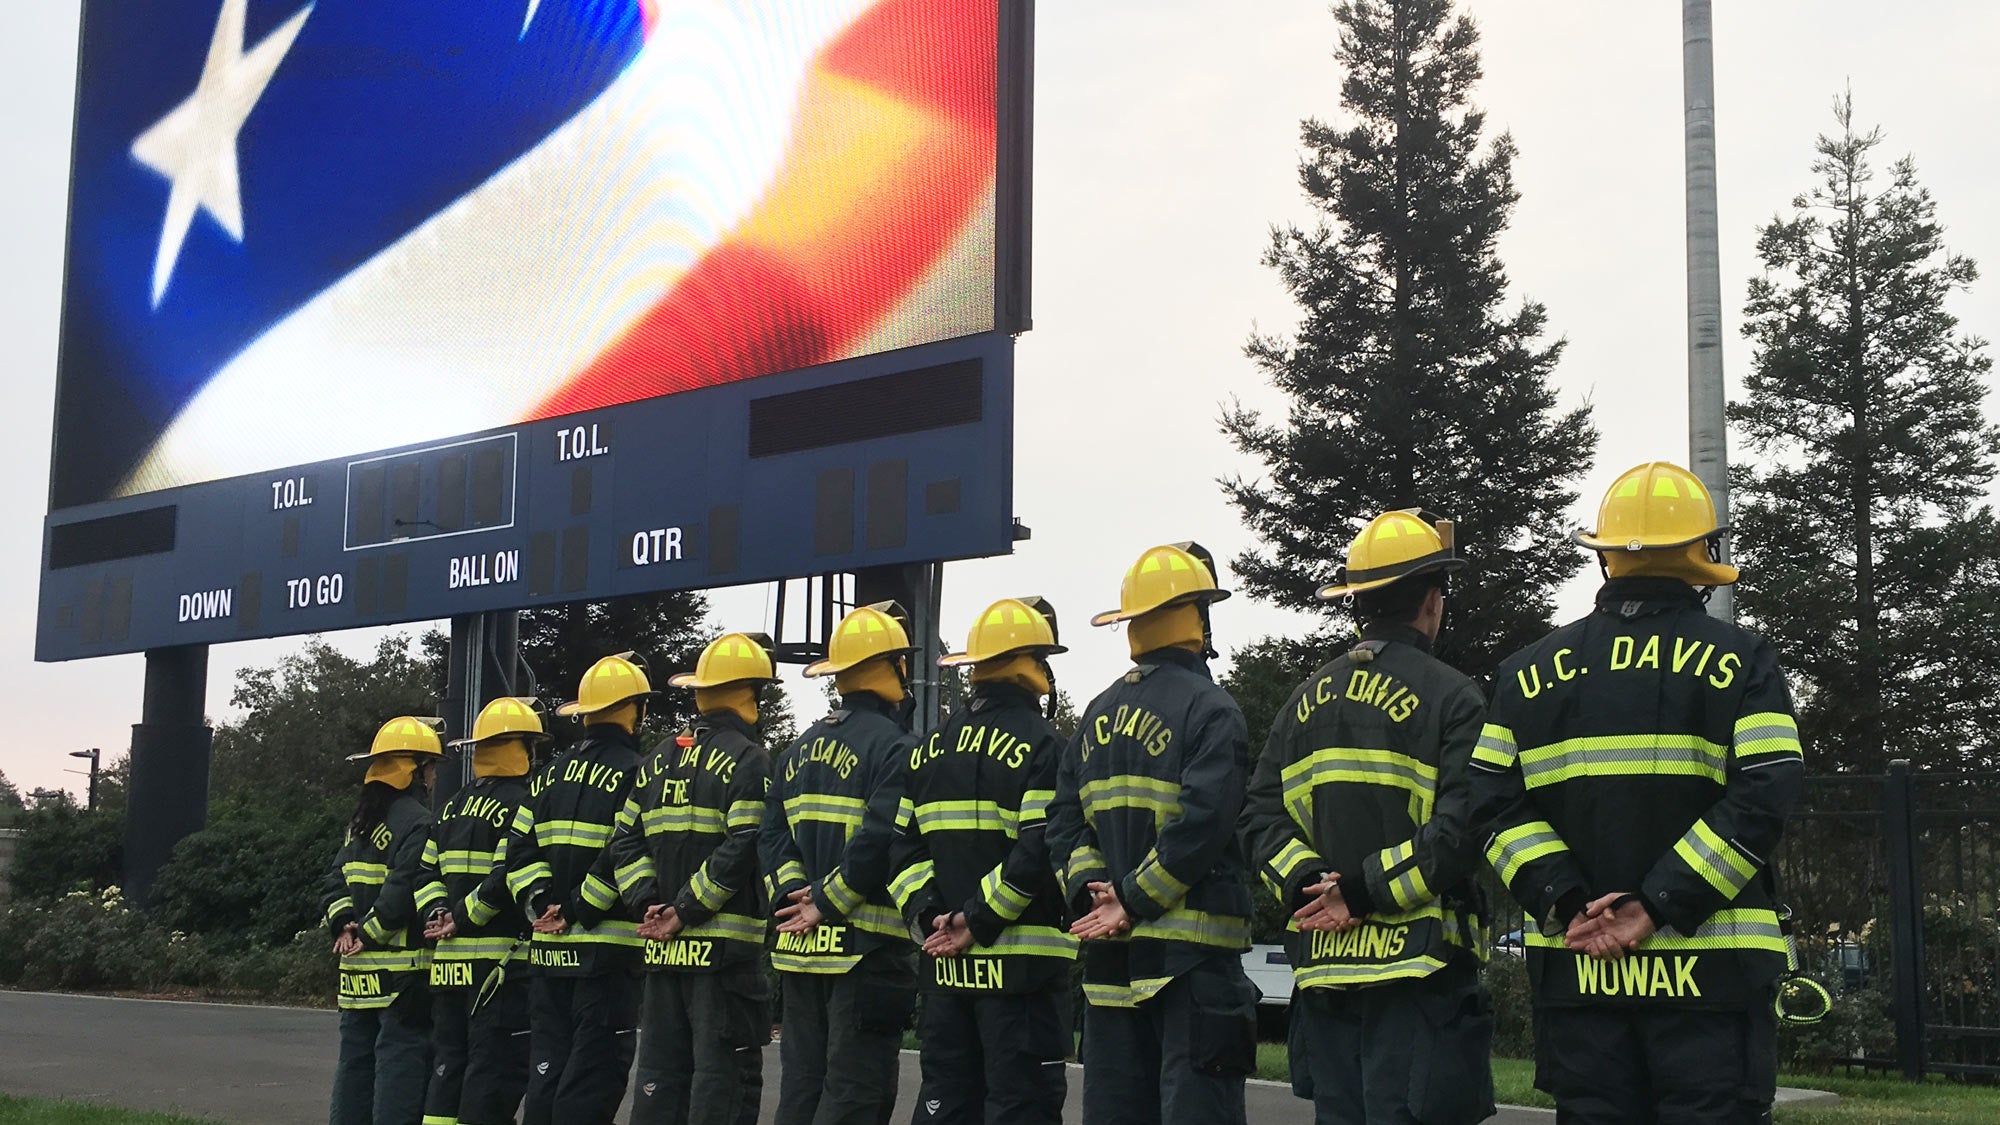 Firefighters in turnouts stand at attention for flag raising, under stadium scoreboard showing the Stars and Stripes